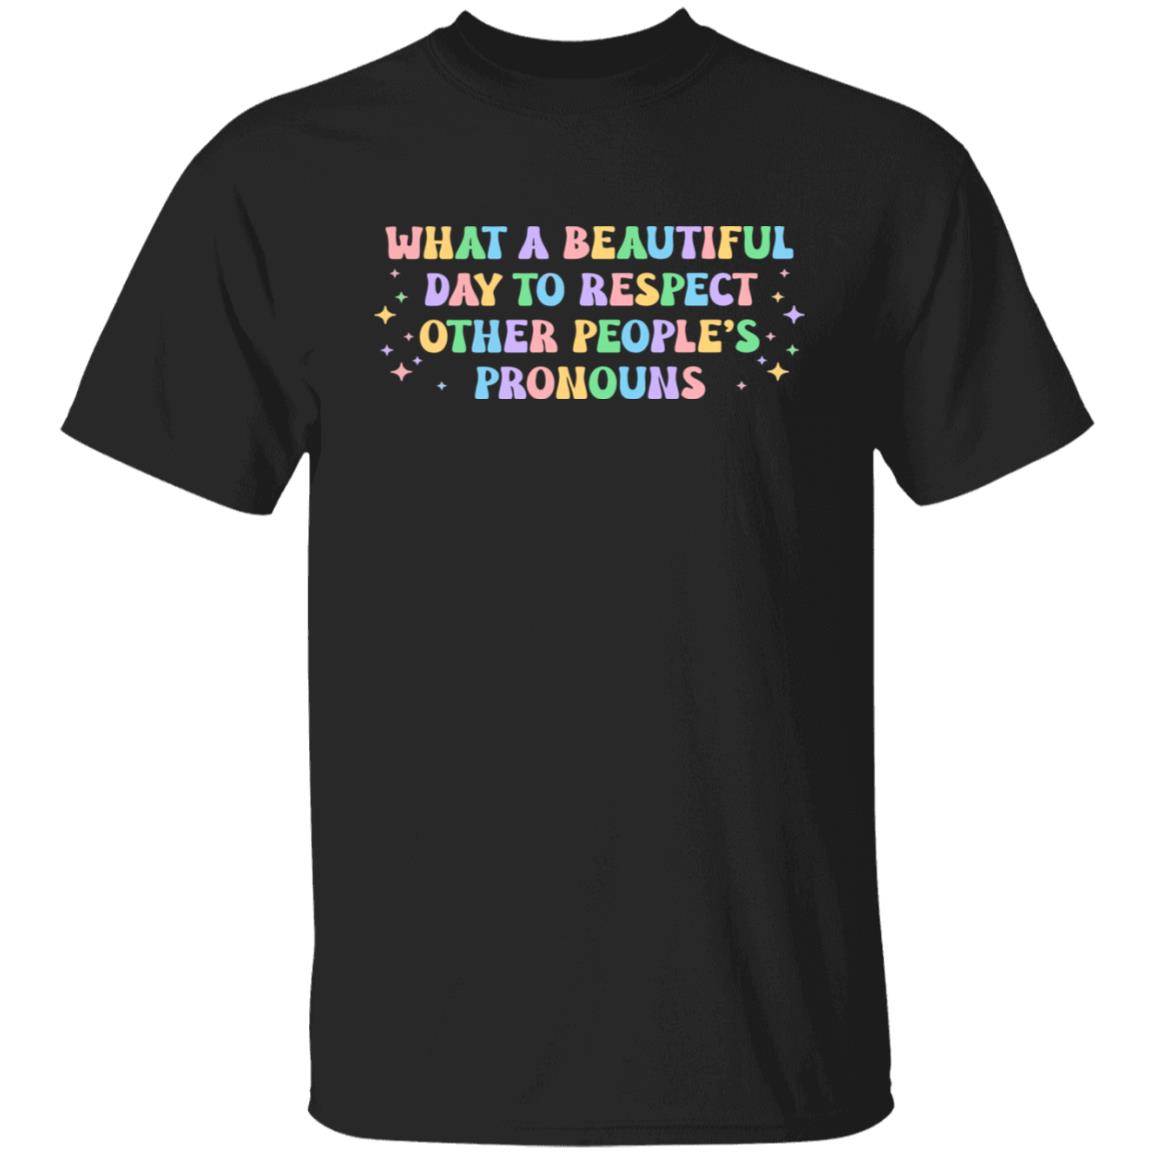 what a beautiful day to respect other people's pronouns shirt, gay rights shirt